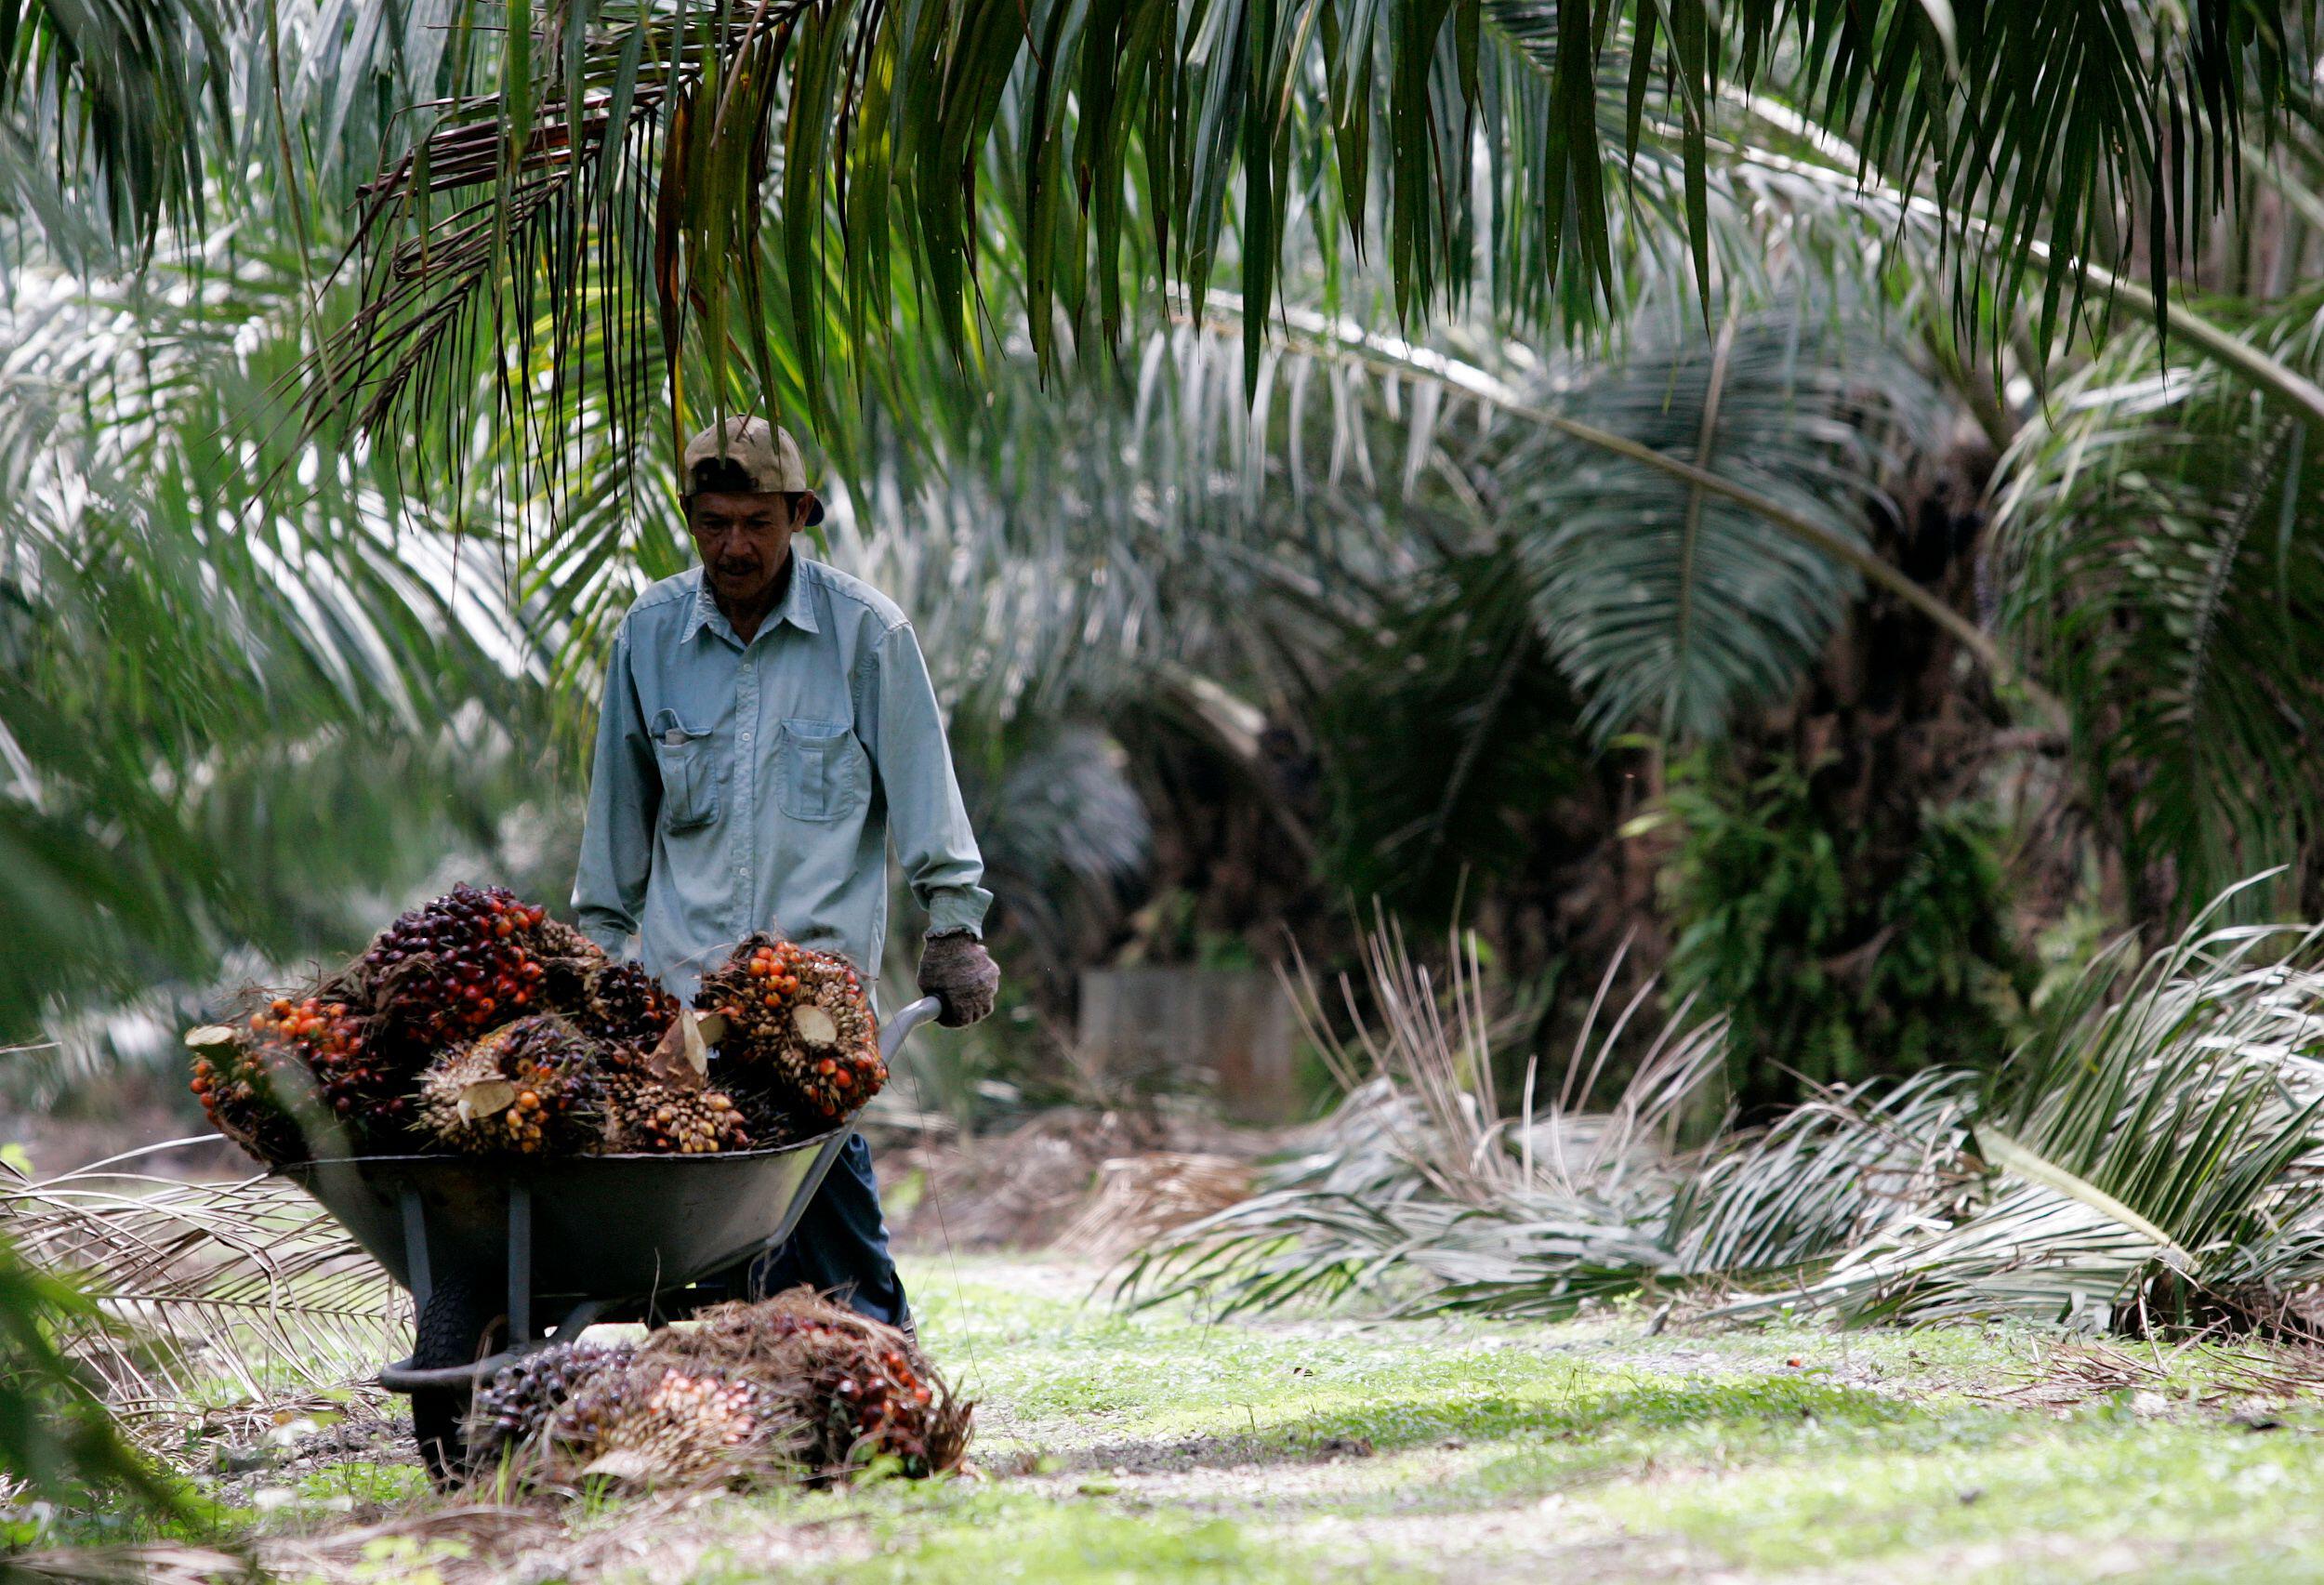 <p>A worker pushes a wheelbarrow of palm oil fruits on a plantation in Malaysia. Although palm oil is one of the most widely traded and used commodities, its production is linked to environmental and social problems, prompting calls to make the supply chain more sustainable. (Image: Zainal Abd Halim / Alamy)</p>